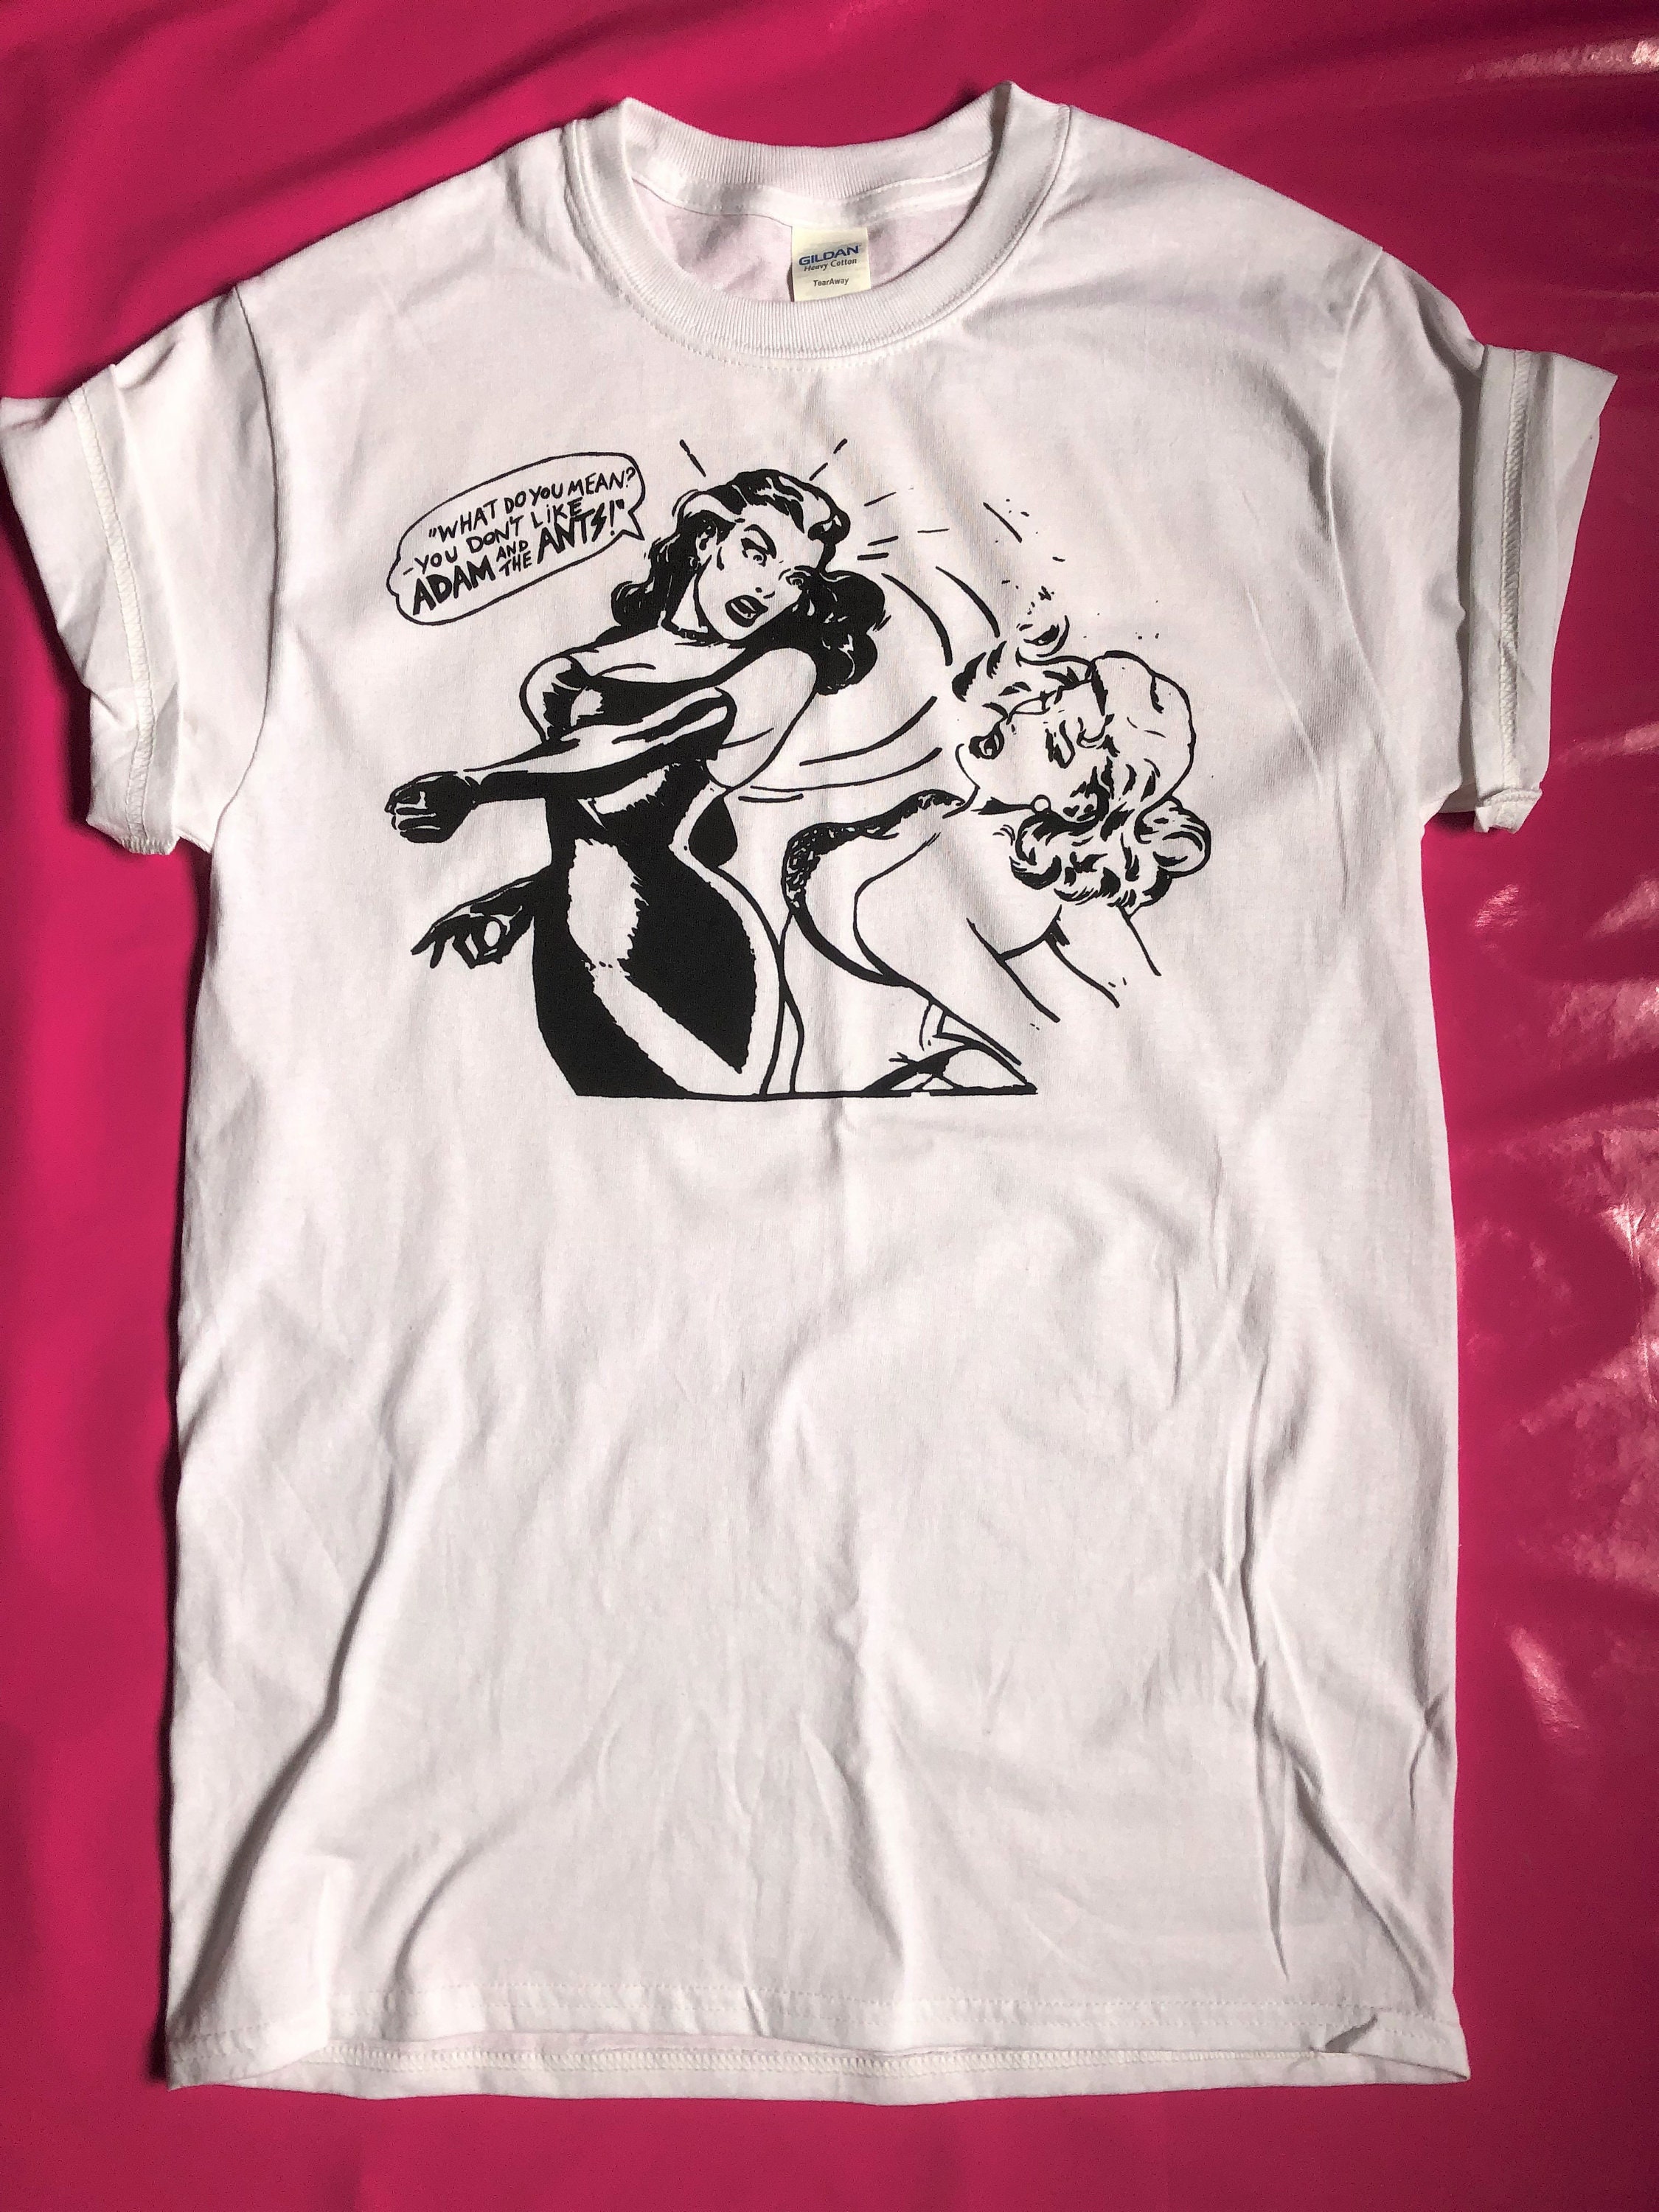 Adam and the Ants Fightning Girls T-Shirt Punk Rock White | Etsy